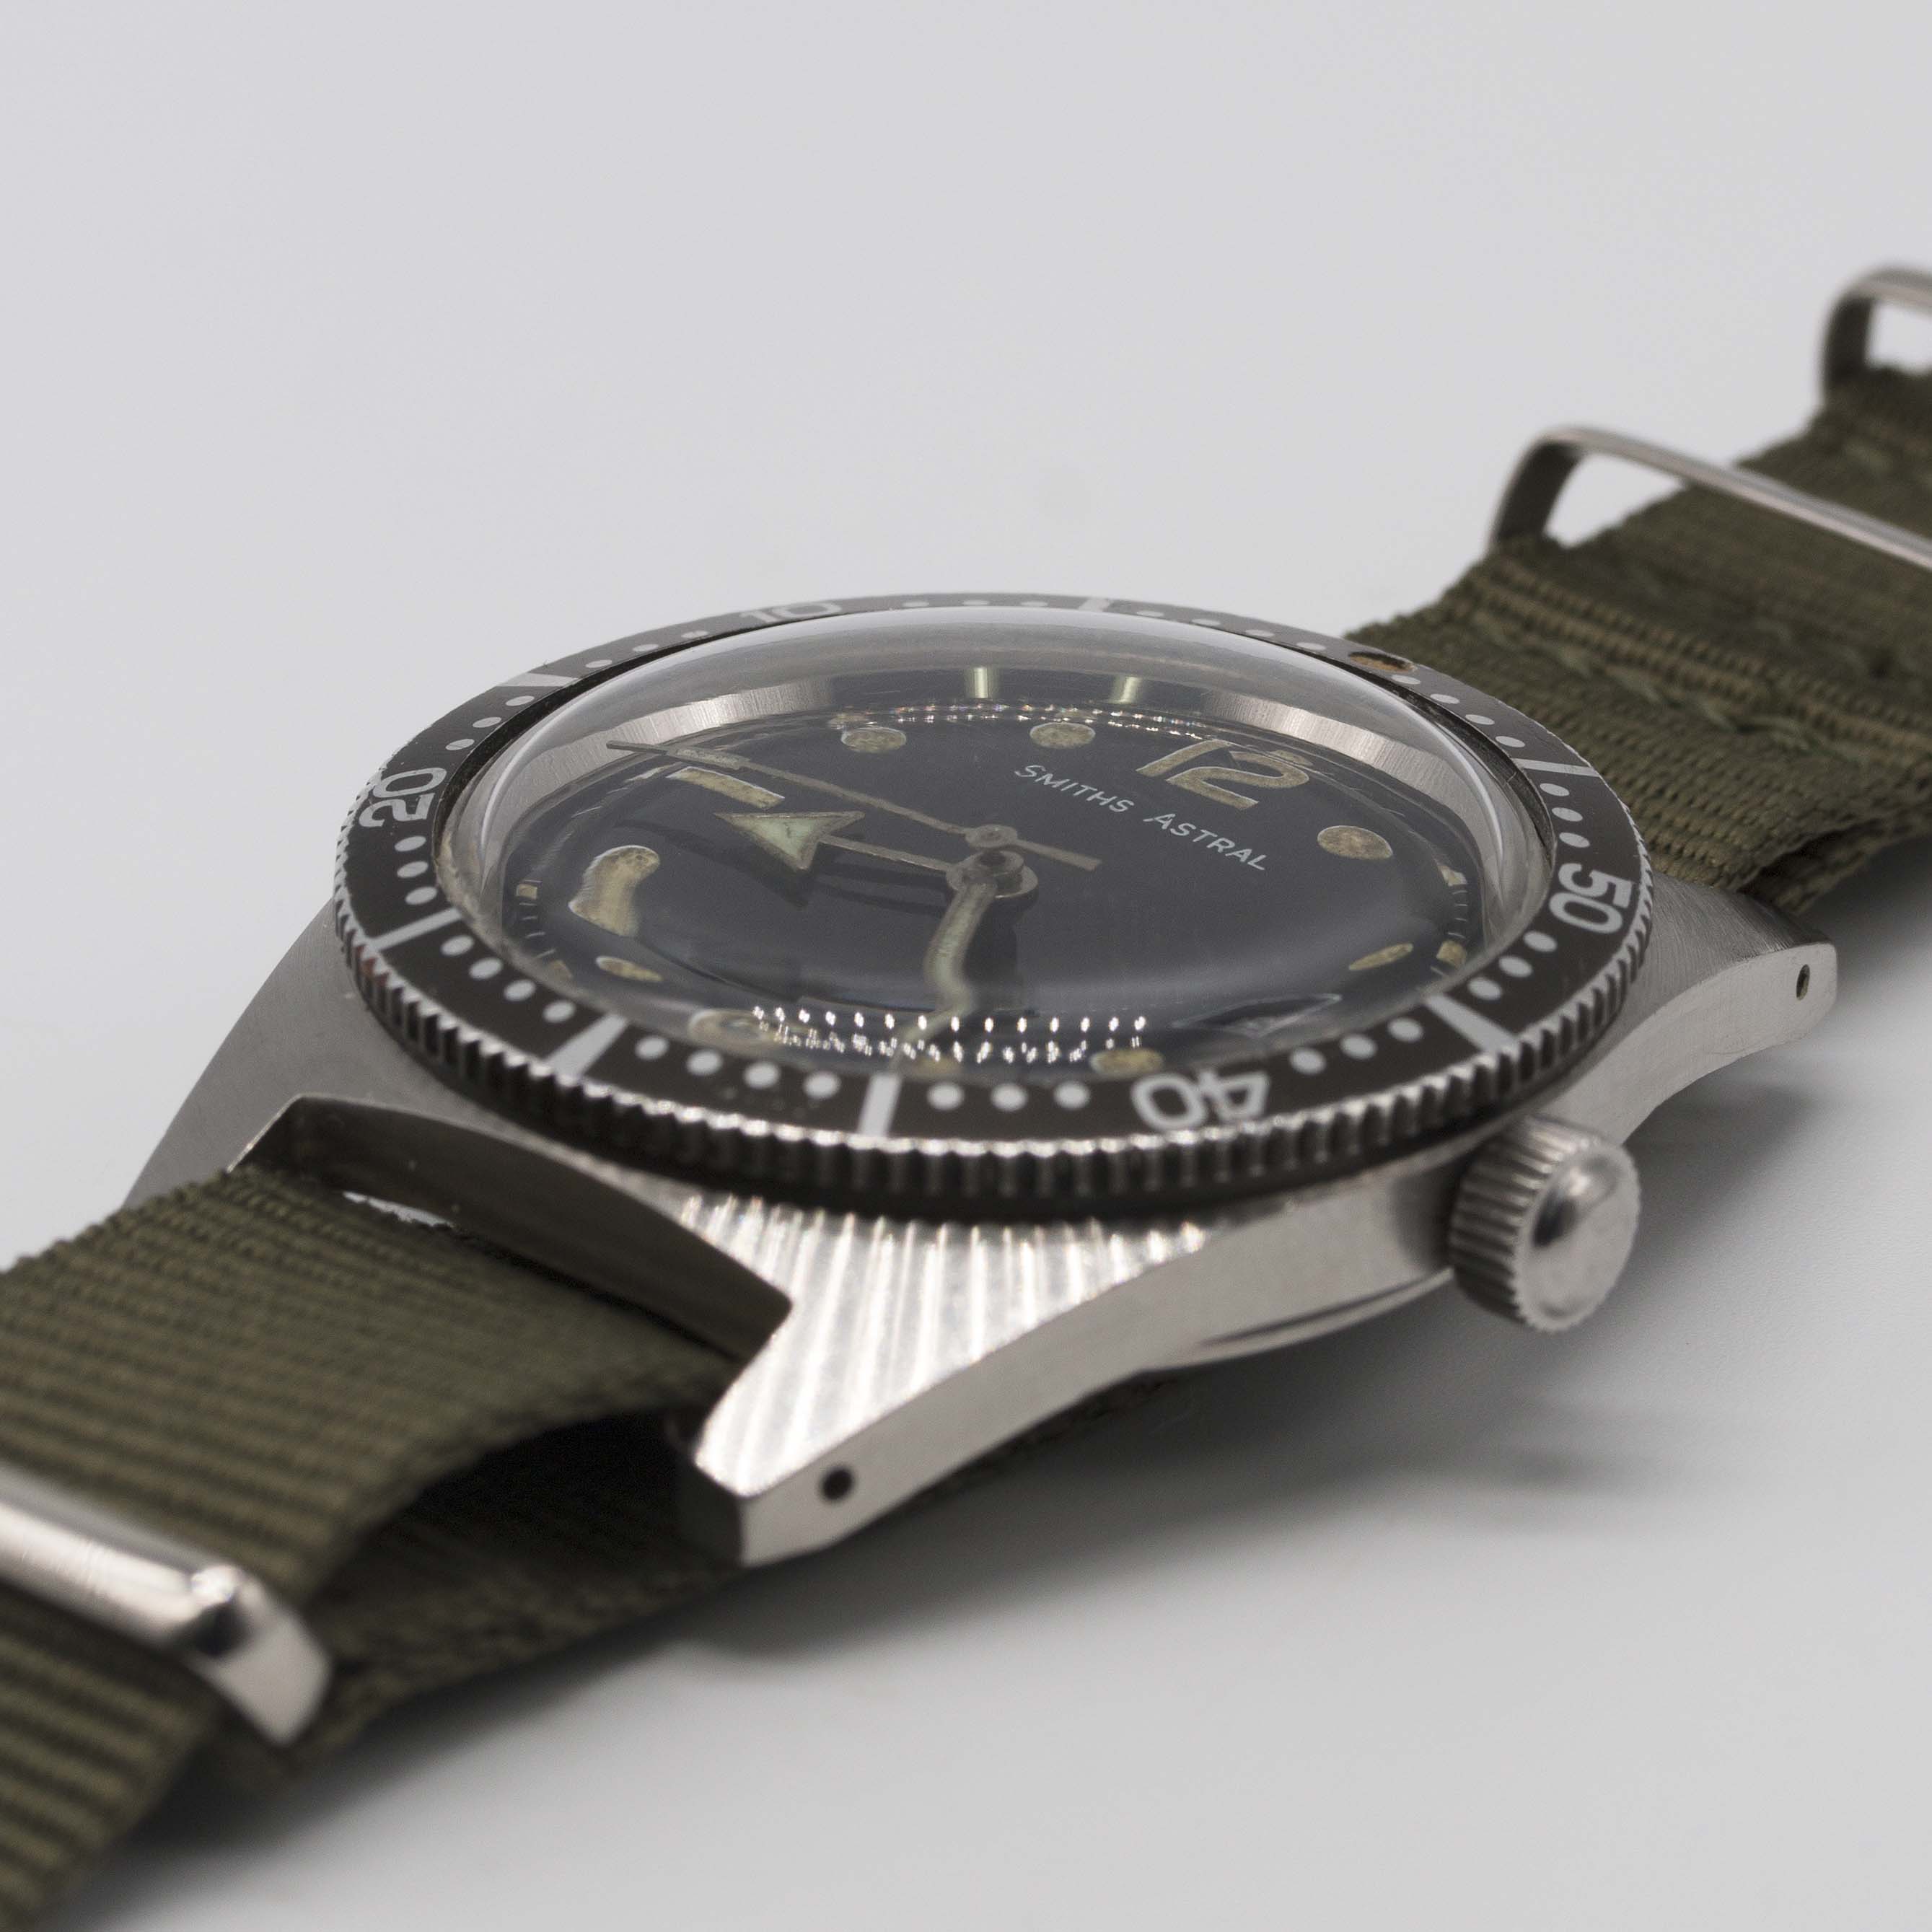 A GENTLEMAN'S STAINLESS STEEL SMITHS ASTRAL "SKIN DIVER" WRIST WATCH CIRCA 1969, REF. CM4501 WITH - Image 3 of 10